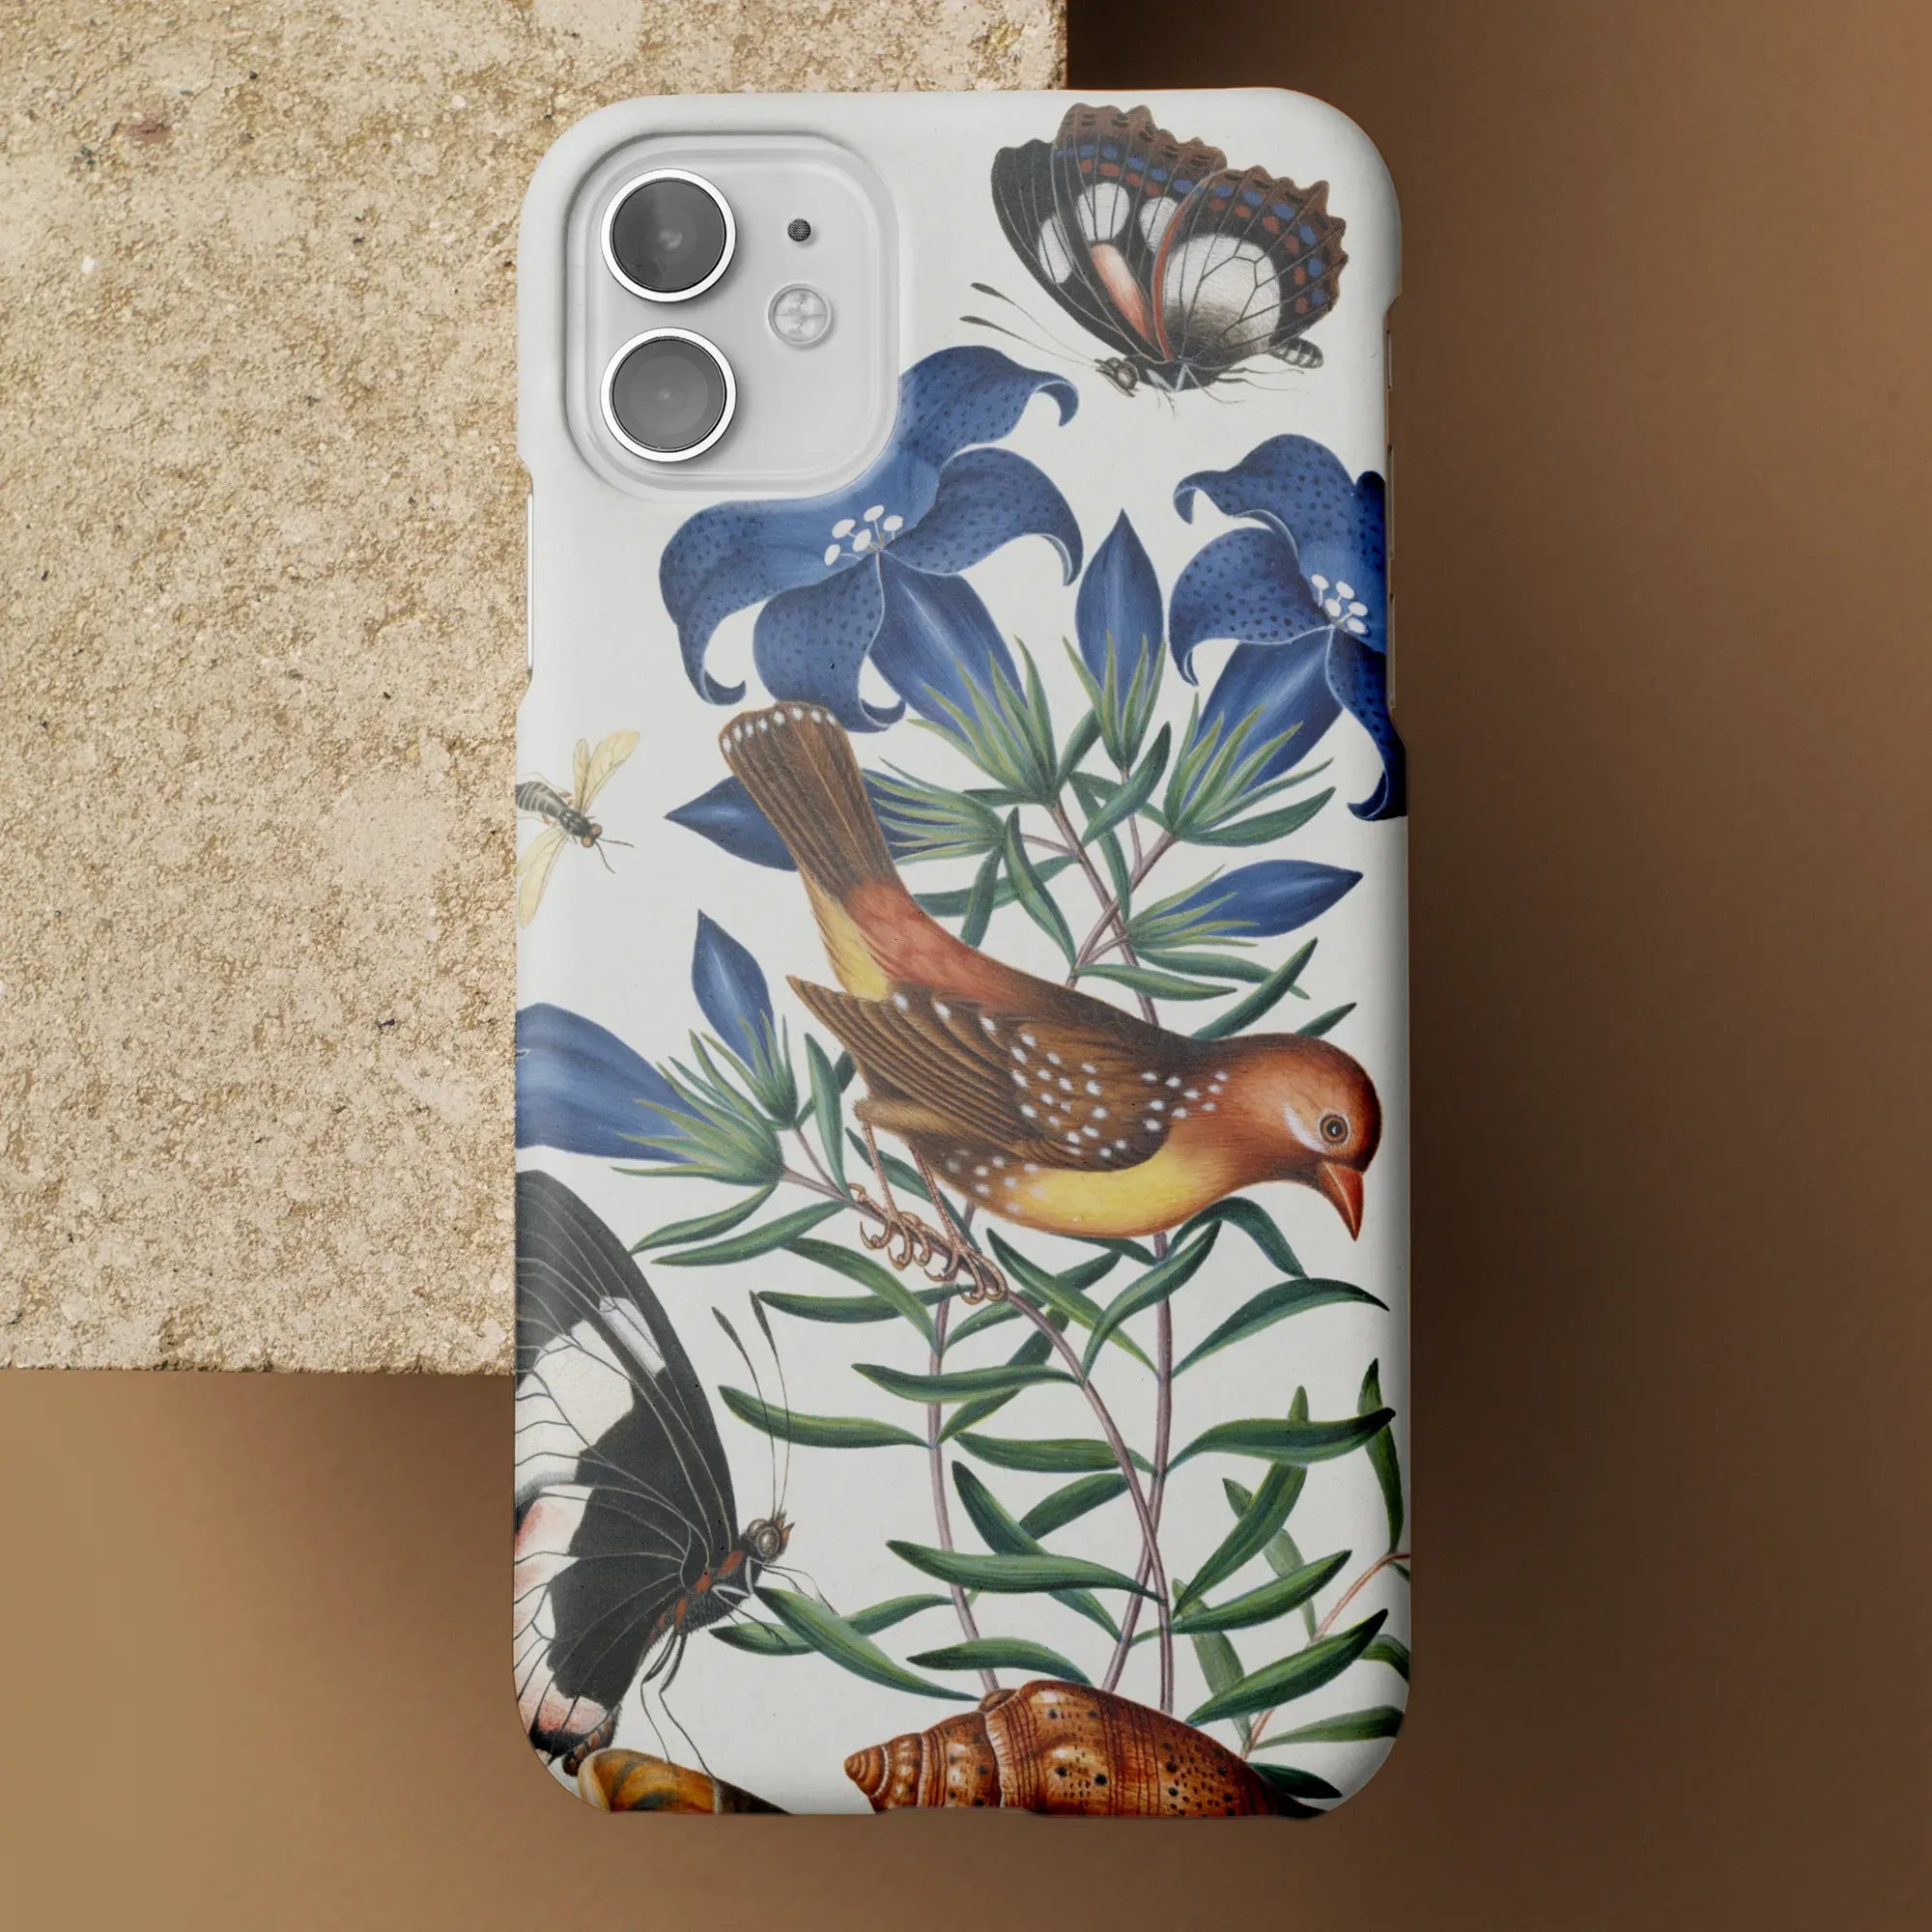 Avadavat Gentian Sawfly Swallowtail And Shells Phone Case - James Bolton - Mobile Phone Cases - Aesthetic Art